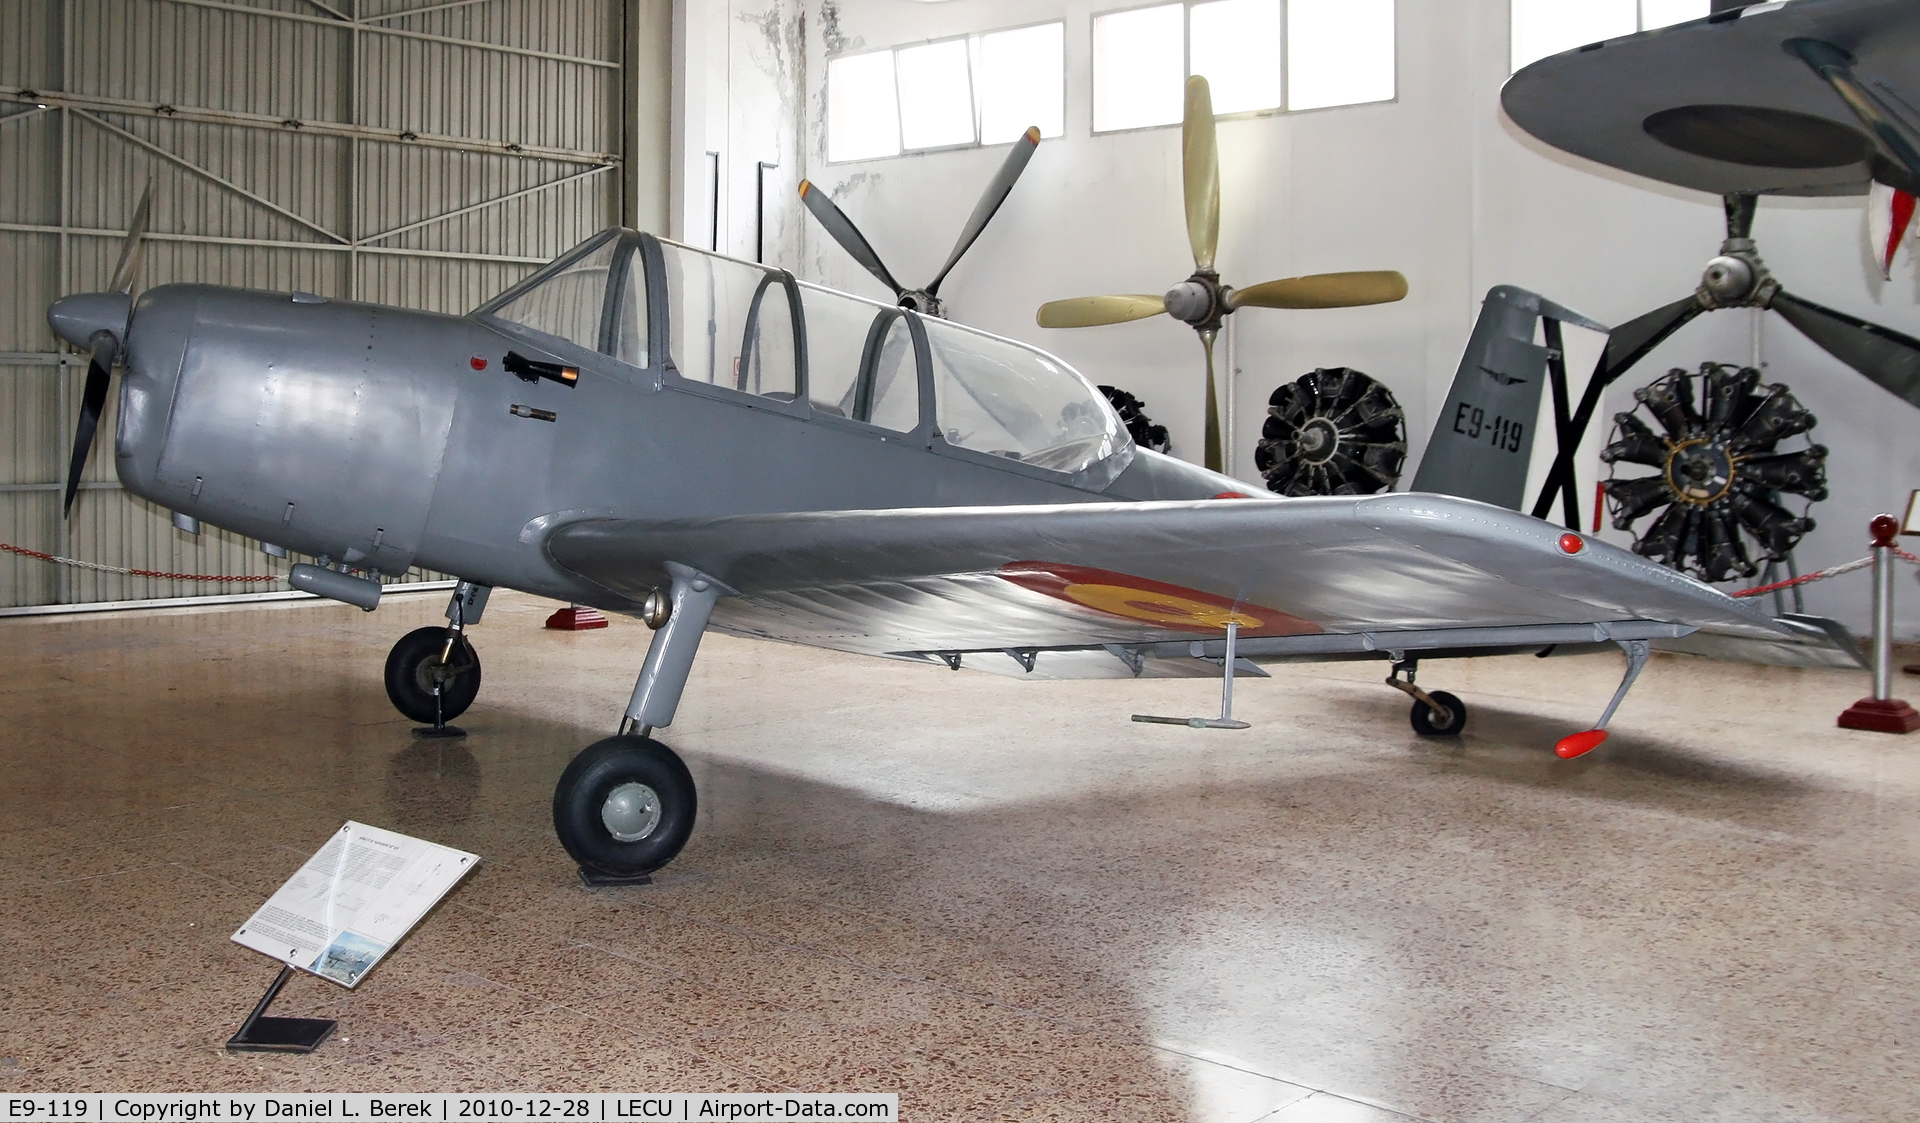 E9-119, AISA I-115 C/N 172, Another view of this unusual little Spanish trainer